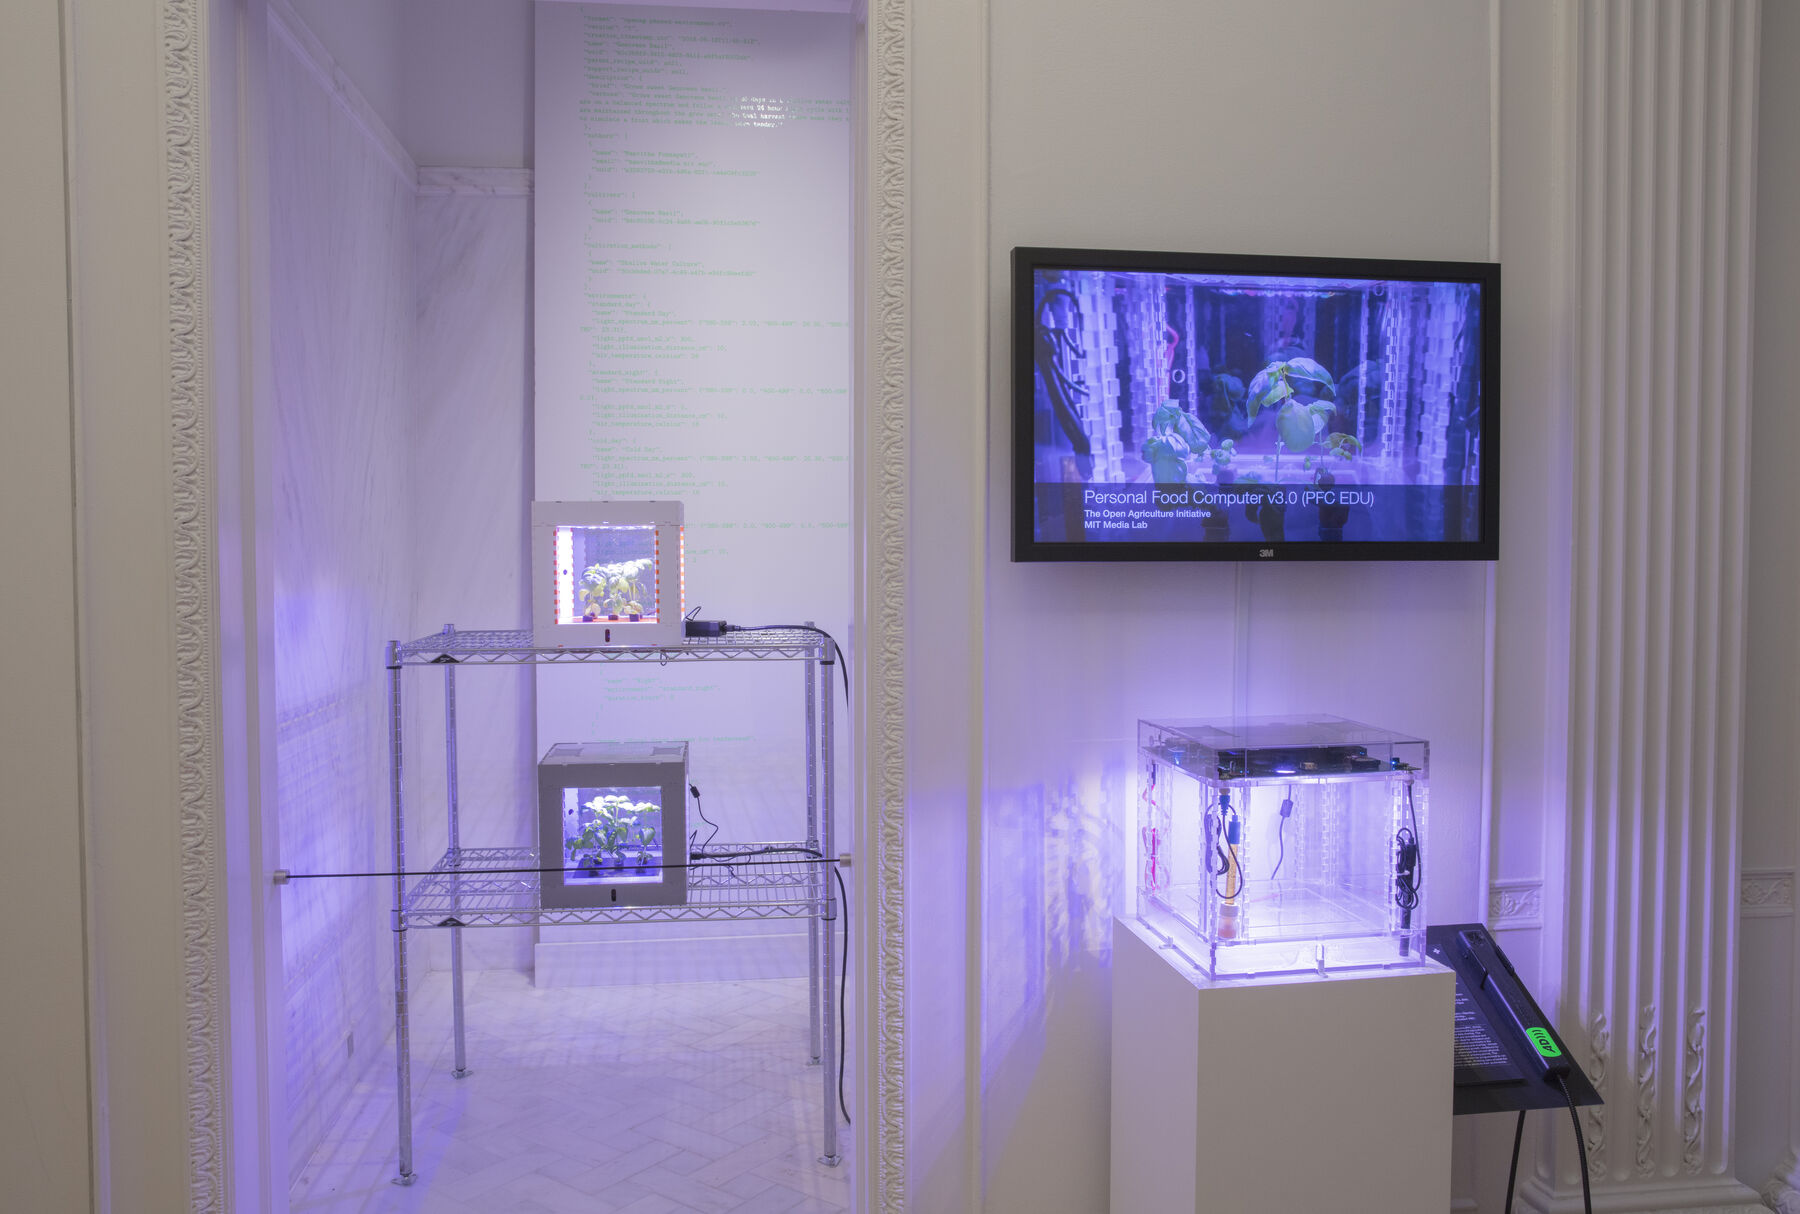 A white room with dim purple lights with a T.V mounted on the entrance displaying the white cube garden chambers found througout the room